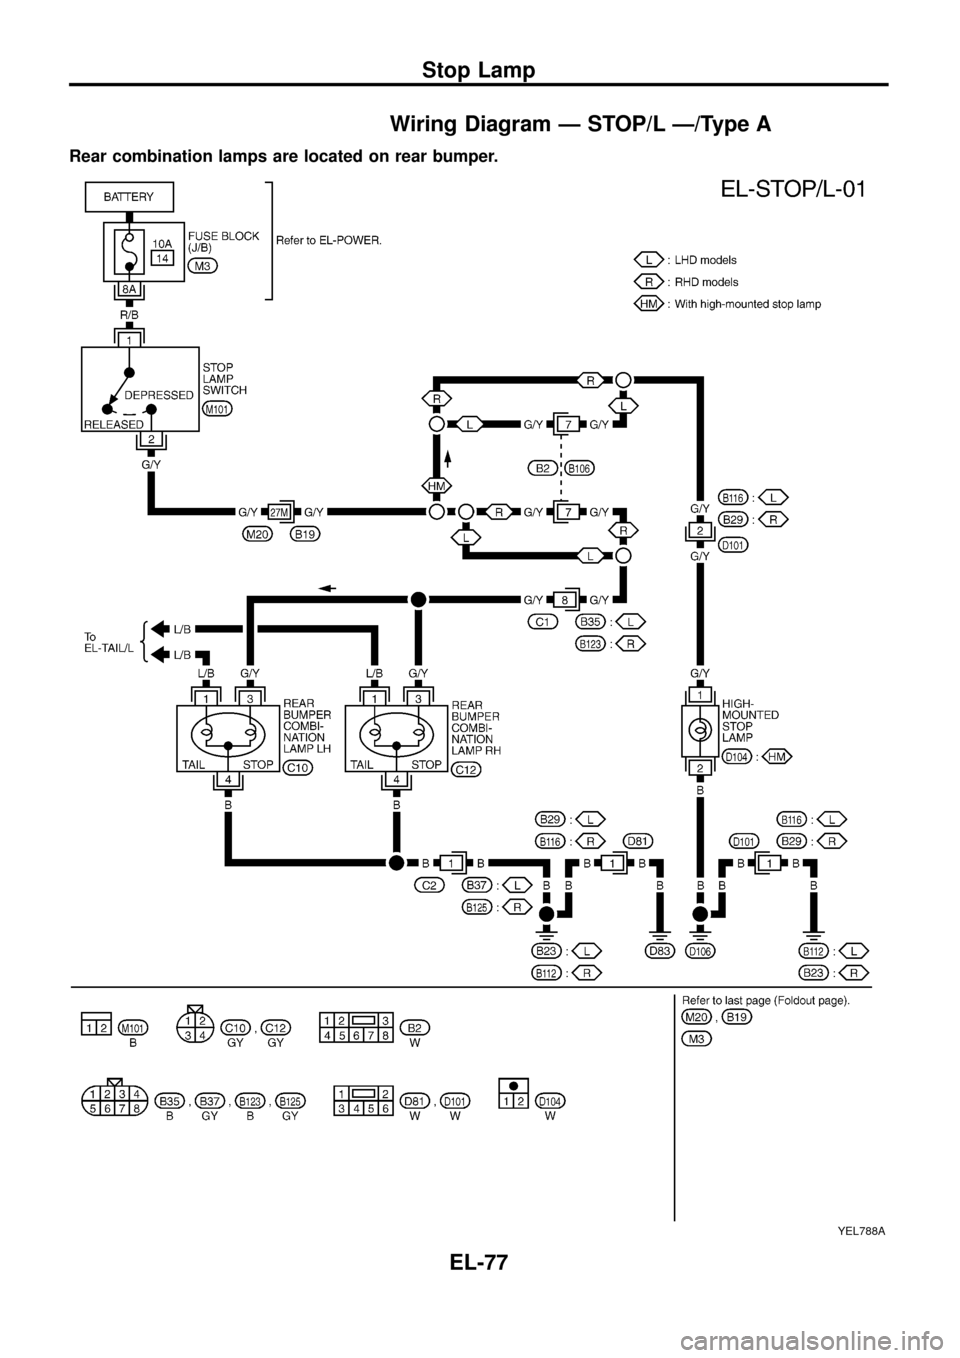 NISSAN PATROL 1998 Y61 / 5.G Electrical System Workshop Manual Wiring Diagram Ð STOP/L Ð/Type A
Rear combination lamps are located on rear bumper.
YEL788A
Stop Lamp
EL-77 